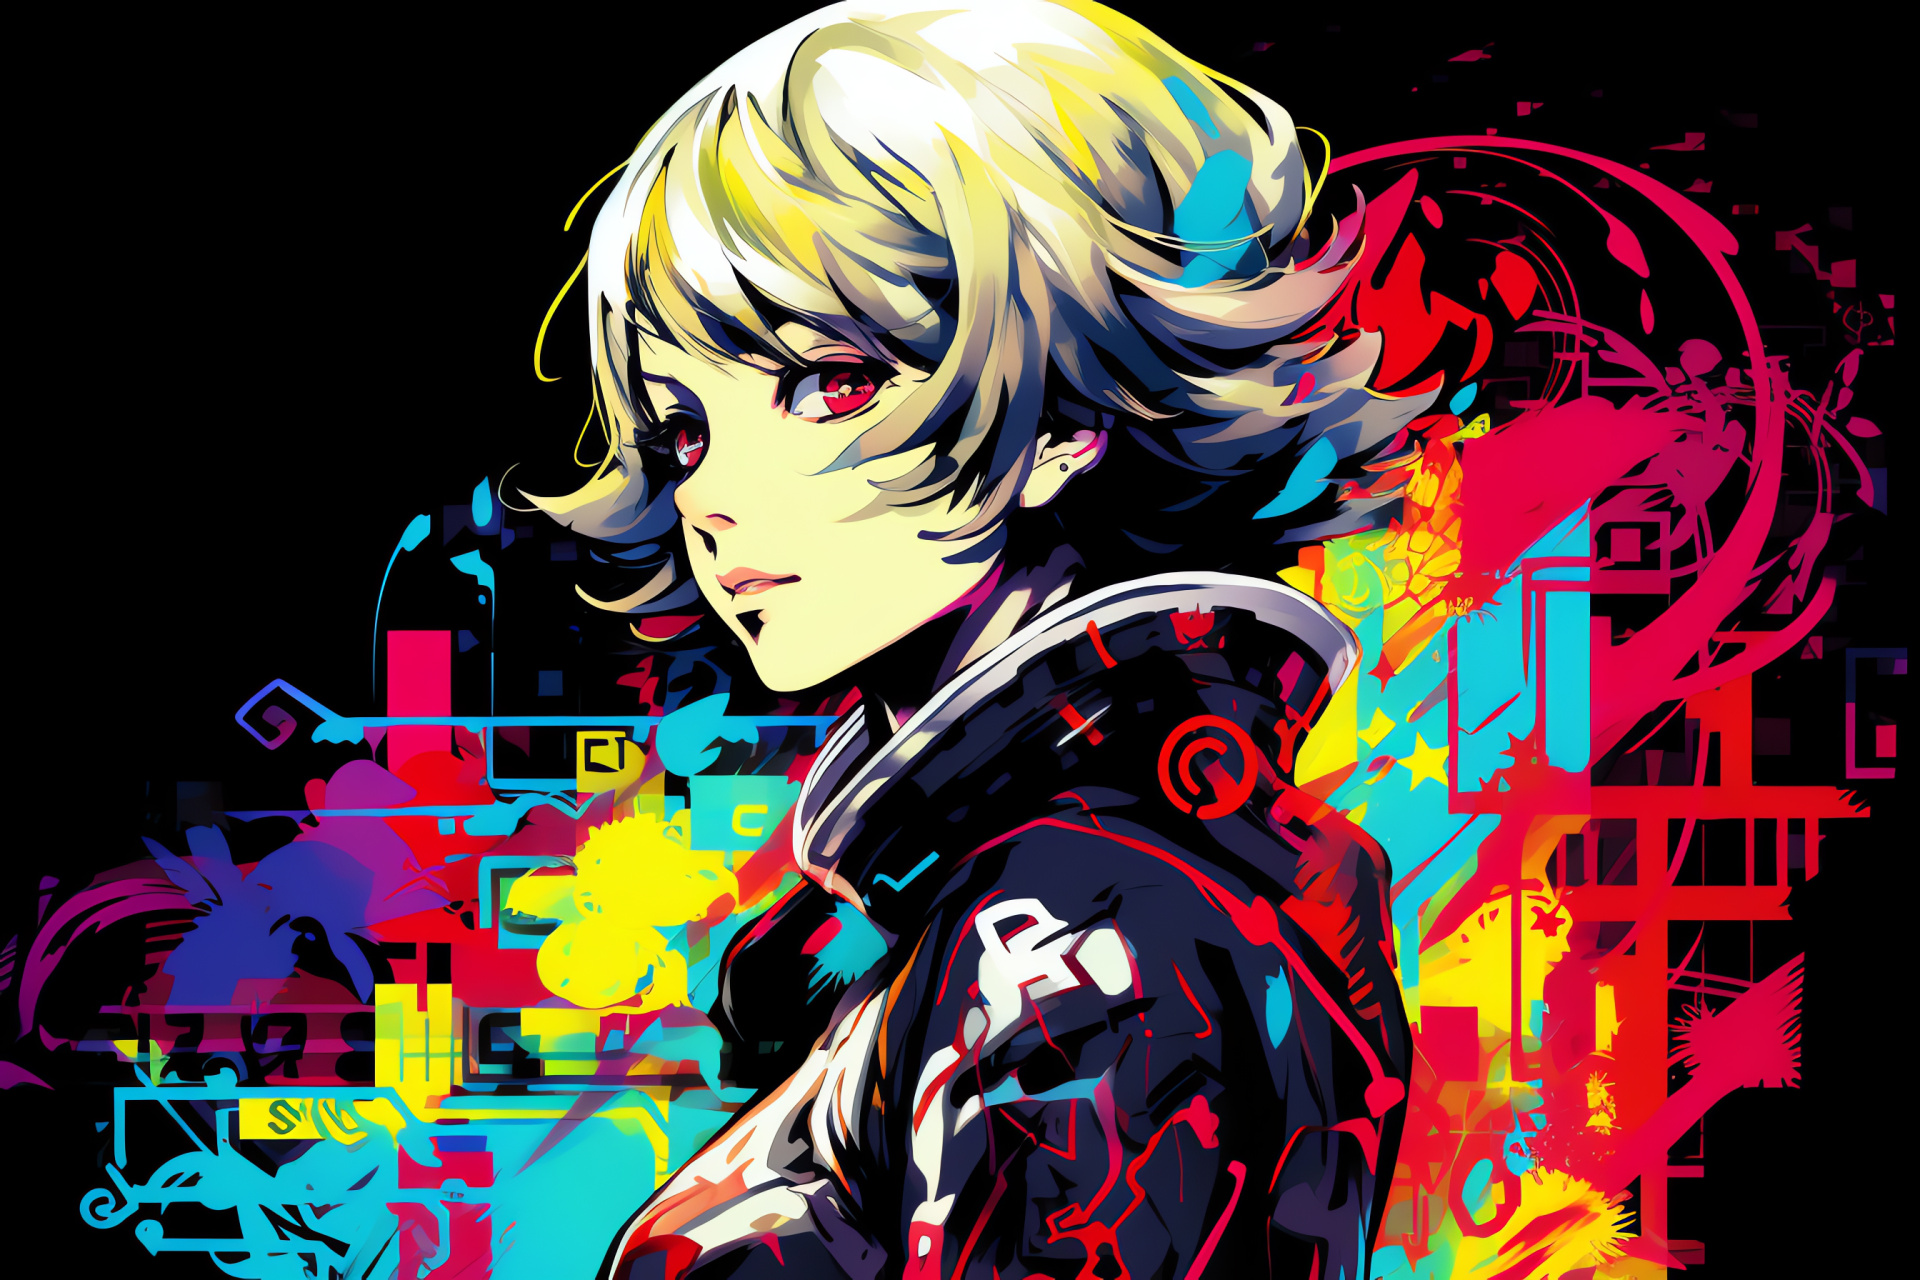 Aigis android form, Persona 3 character, RPG genre icon, Confident portrayal, HD Desktop Image